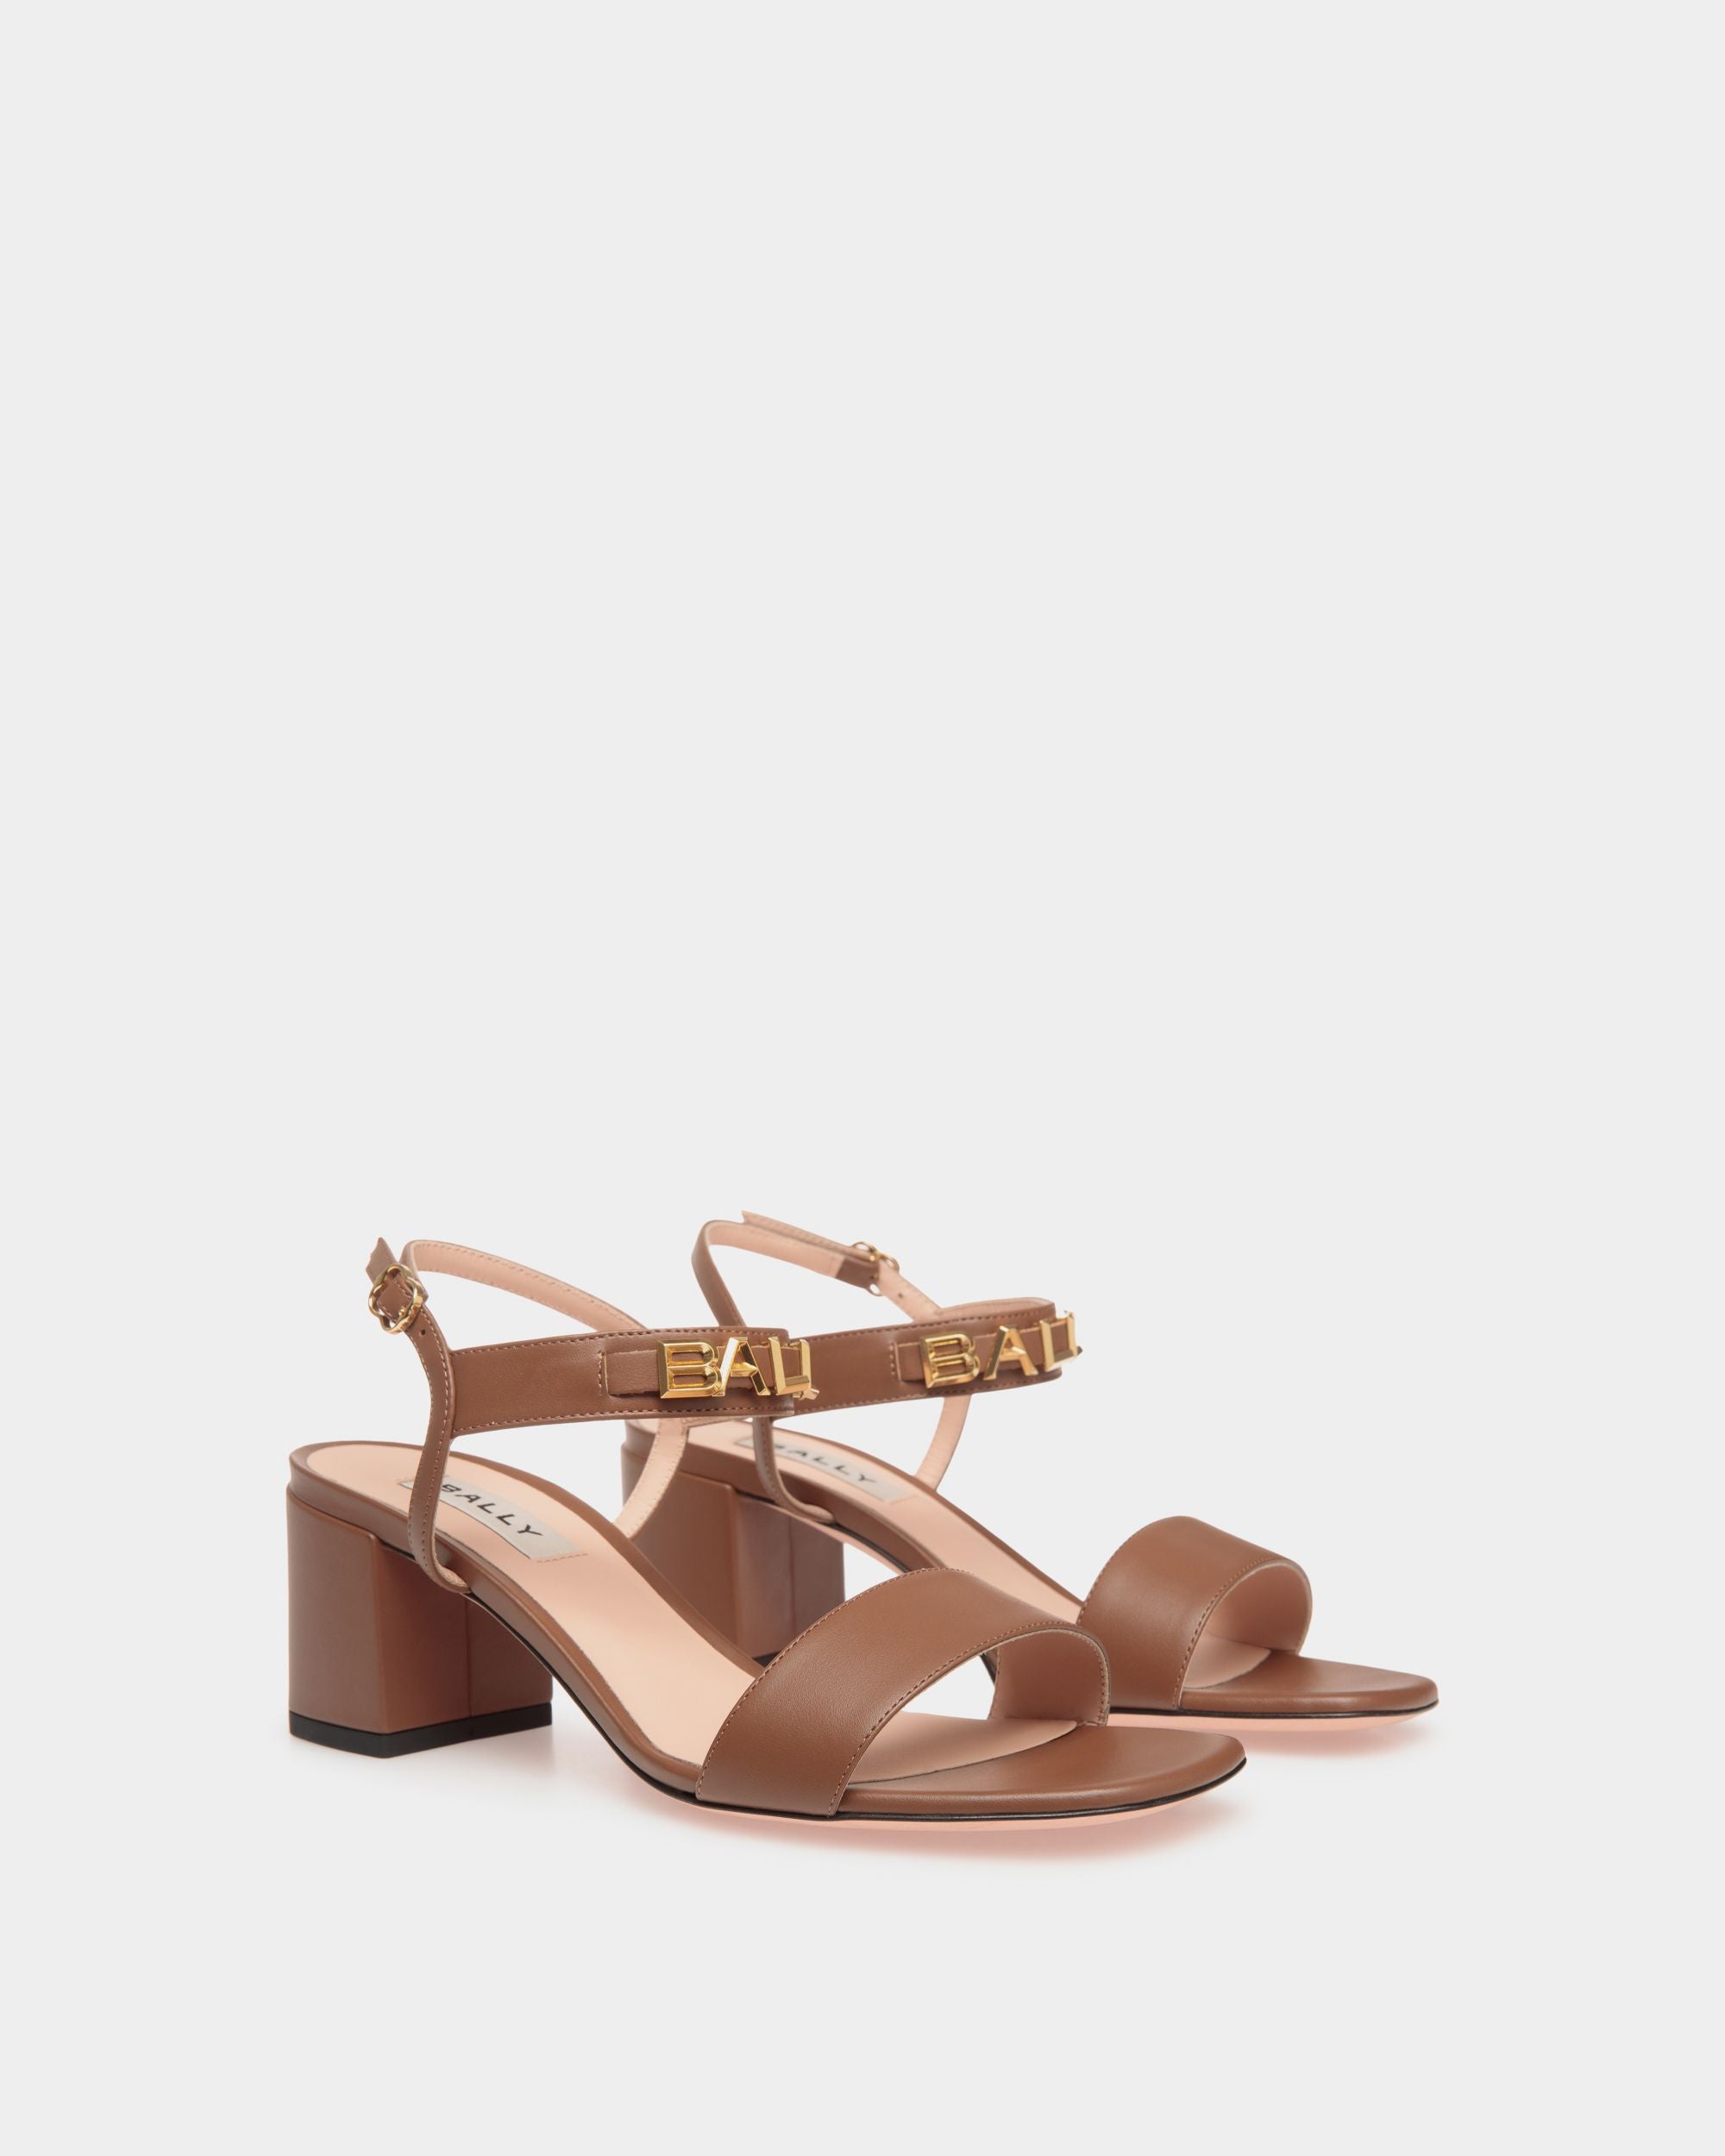 Bally Spell | Women's Heeled Sandal in Brown Leather | Bally | Still Life 3/4 Front